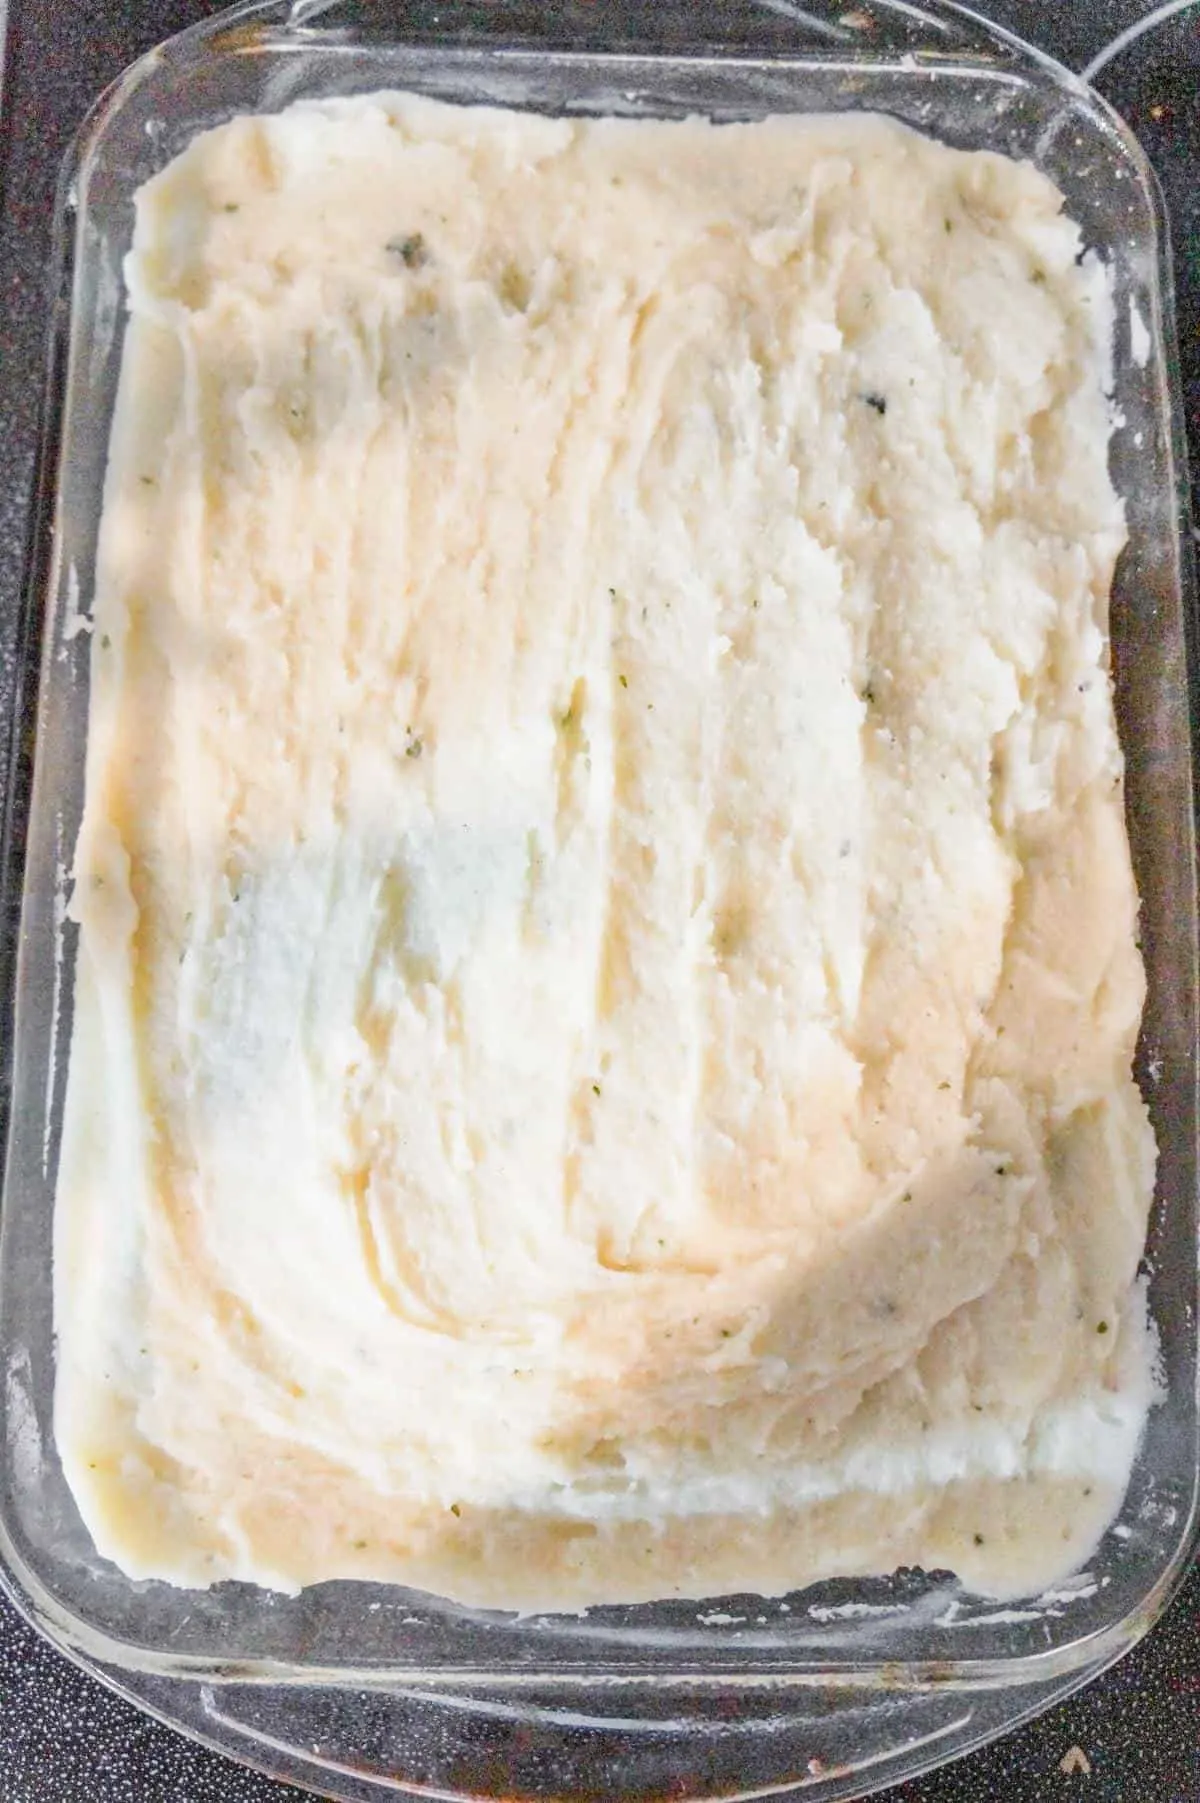 mashed potatoes spread on top of casserole in a baking dish